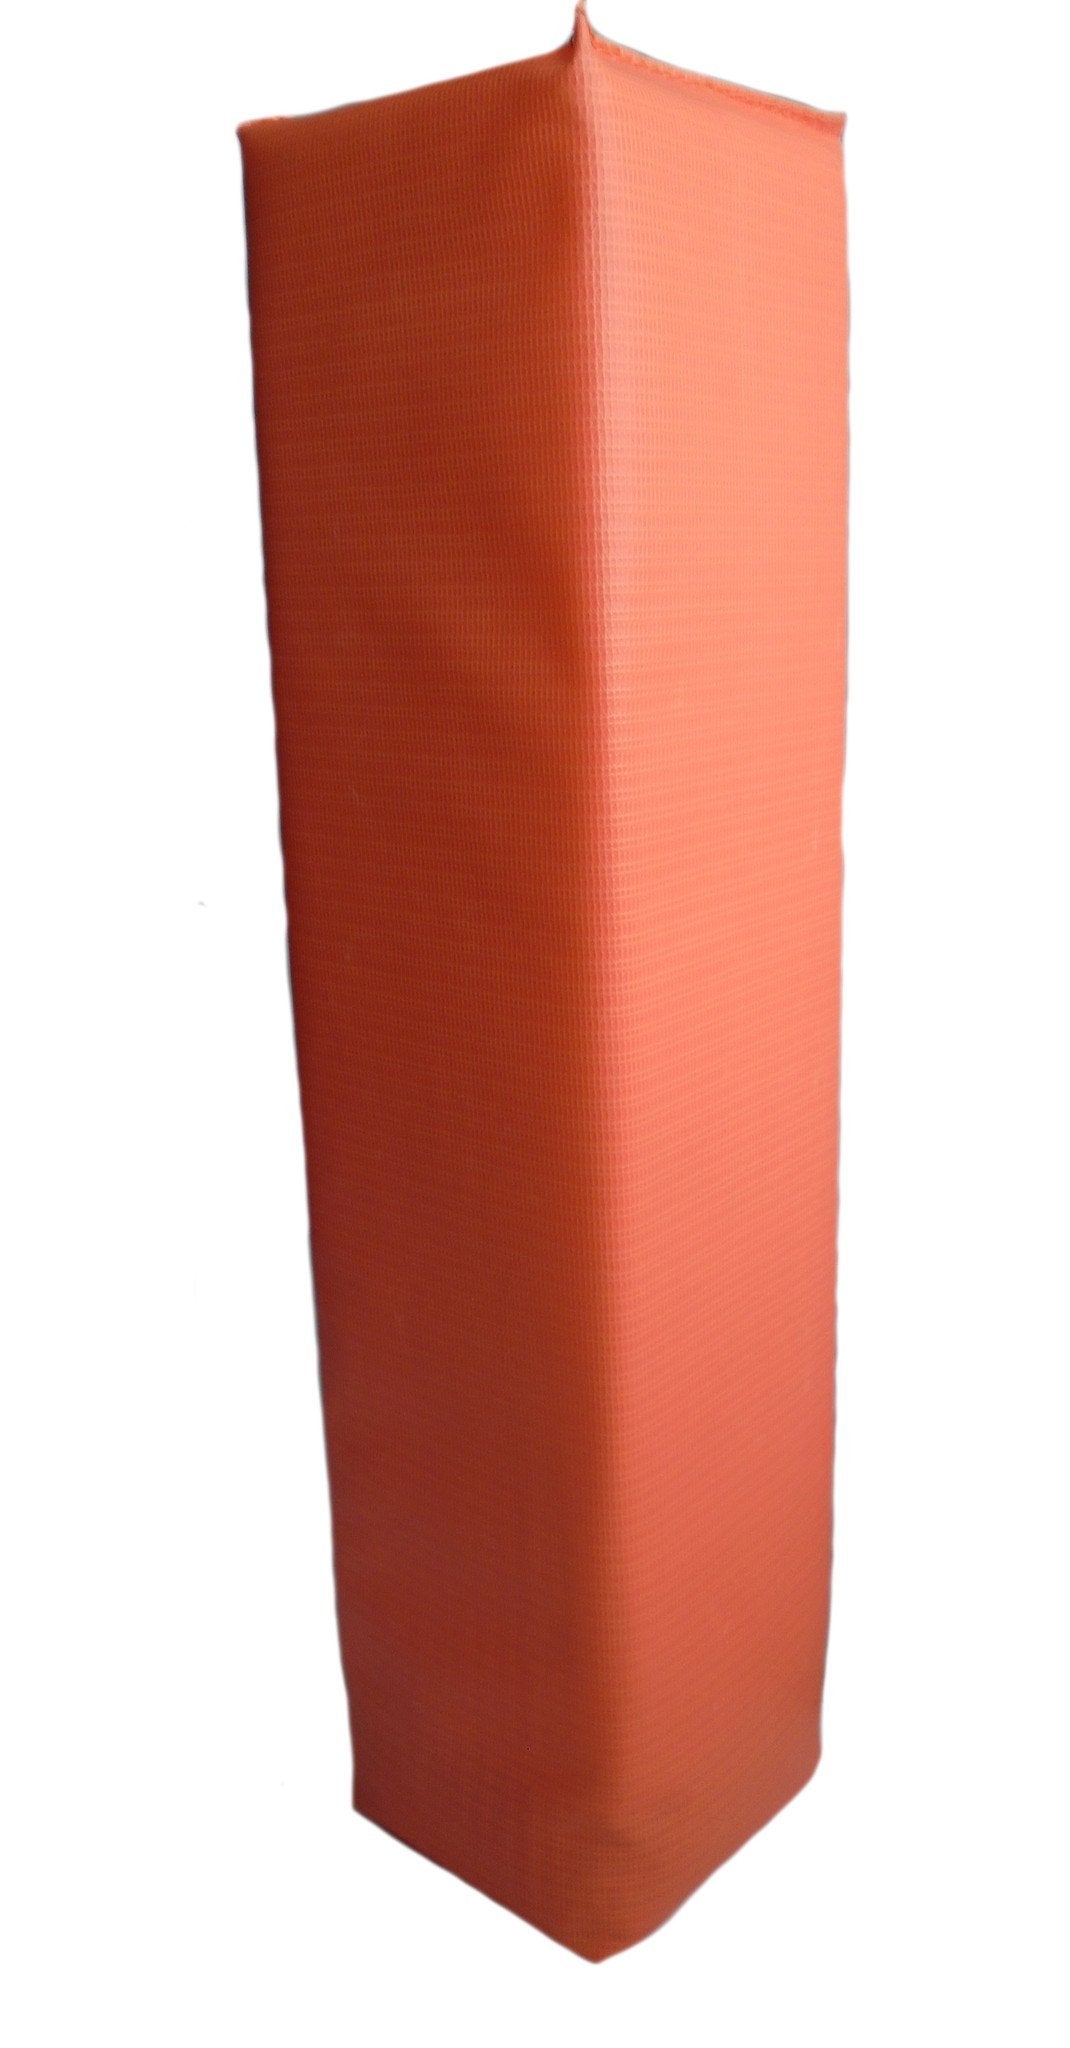 Football End Zone Pylons- Autographed- Andrew Luck Signed Indianapolis Colts TD Pylon, PSA/DNA 4